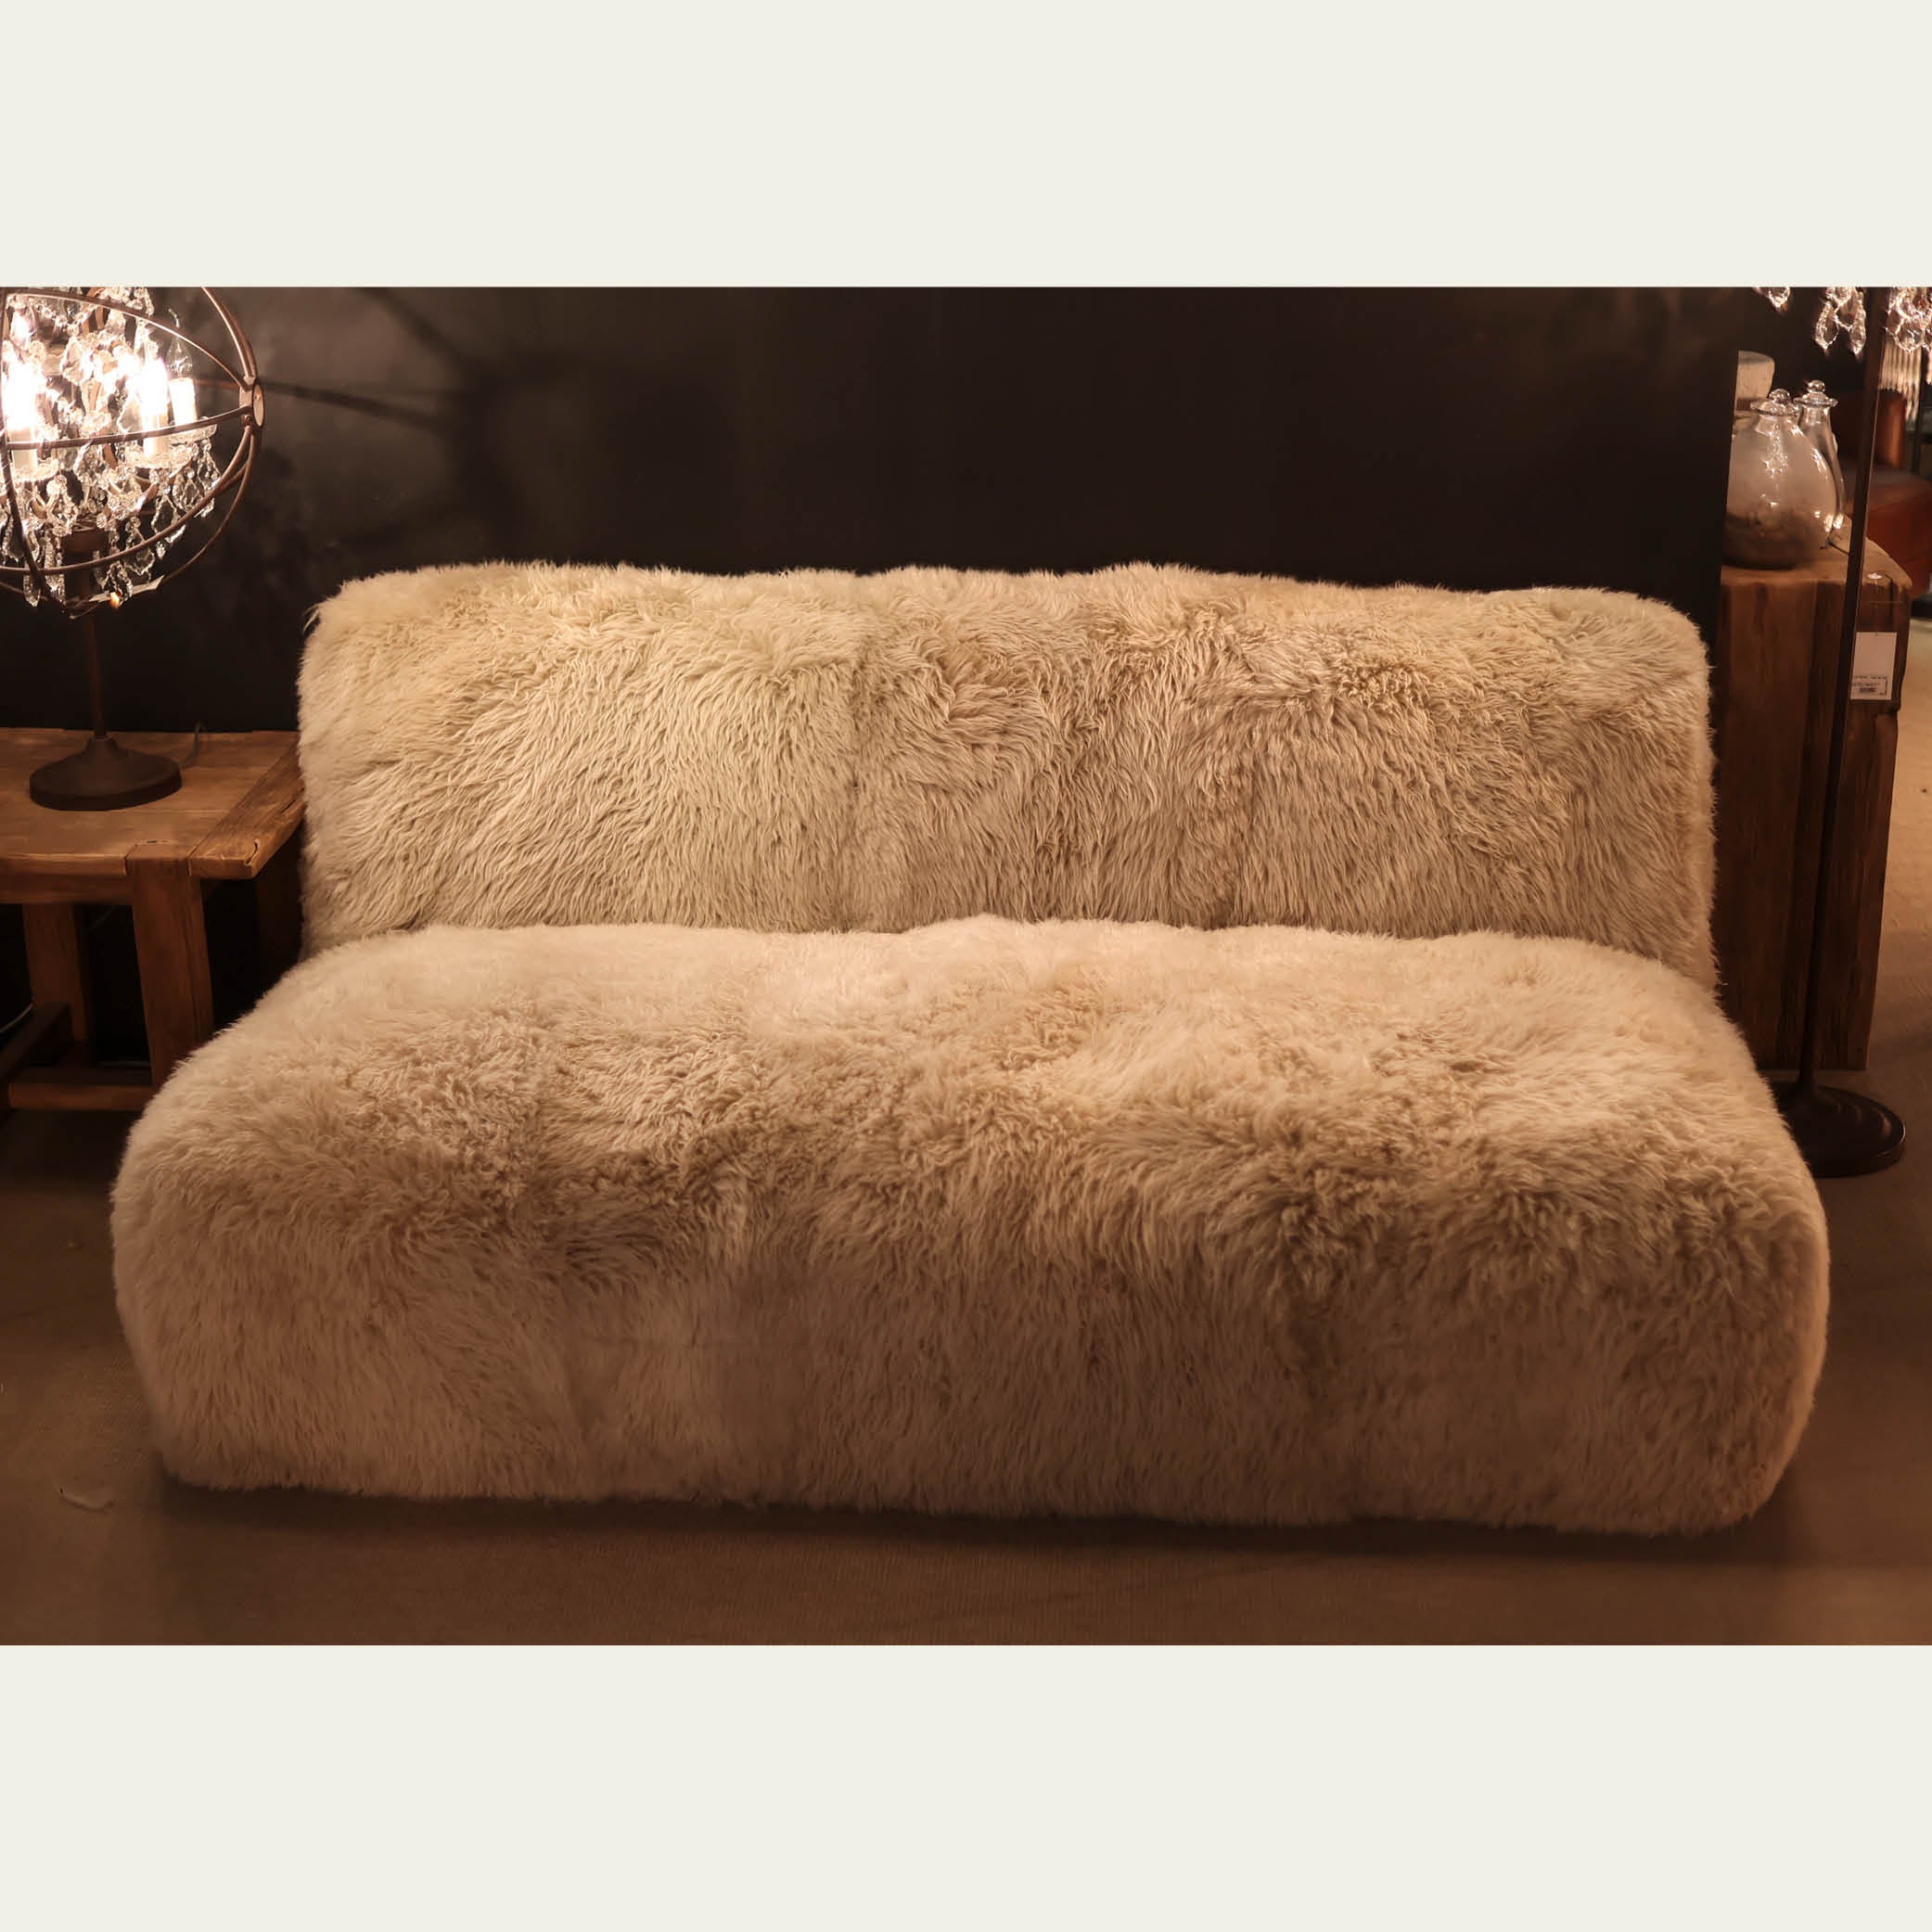 EXPO Timothy Oulton SHAGGY 3-seater